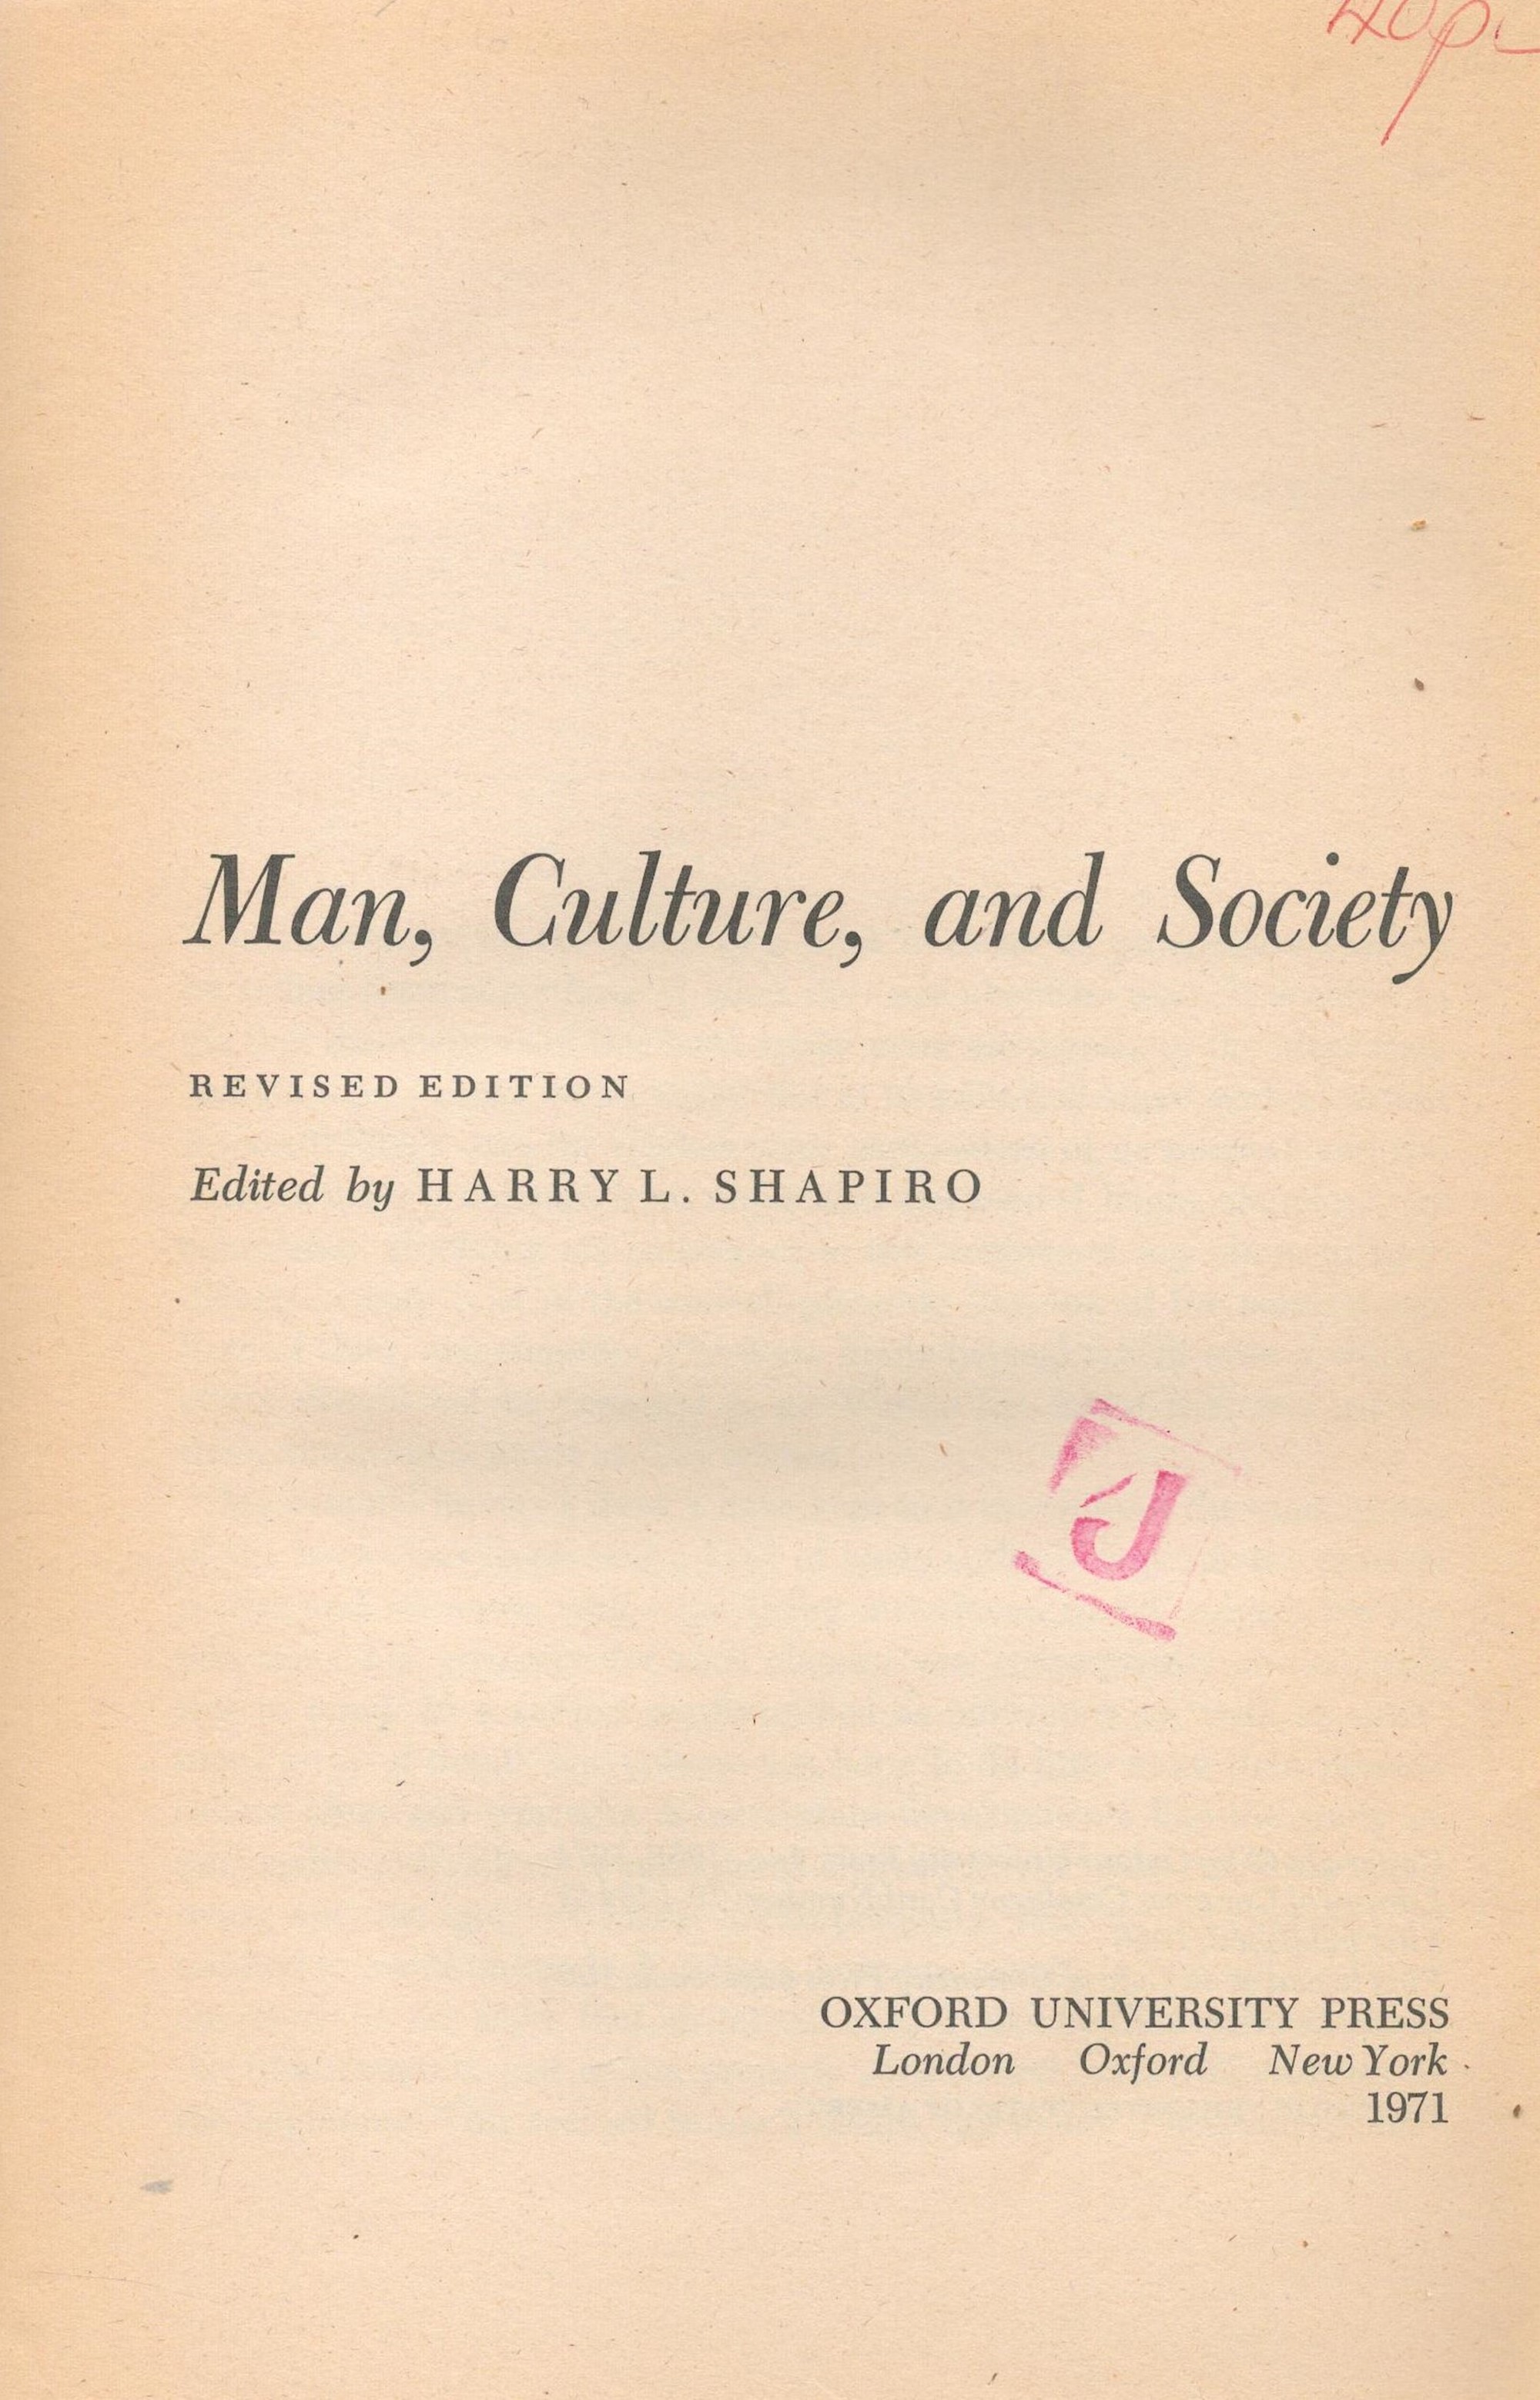 Man, Culture, and Society edited by Harry L Shapiro Softback Book 1971 Revised Edition published - Image 4 of 6